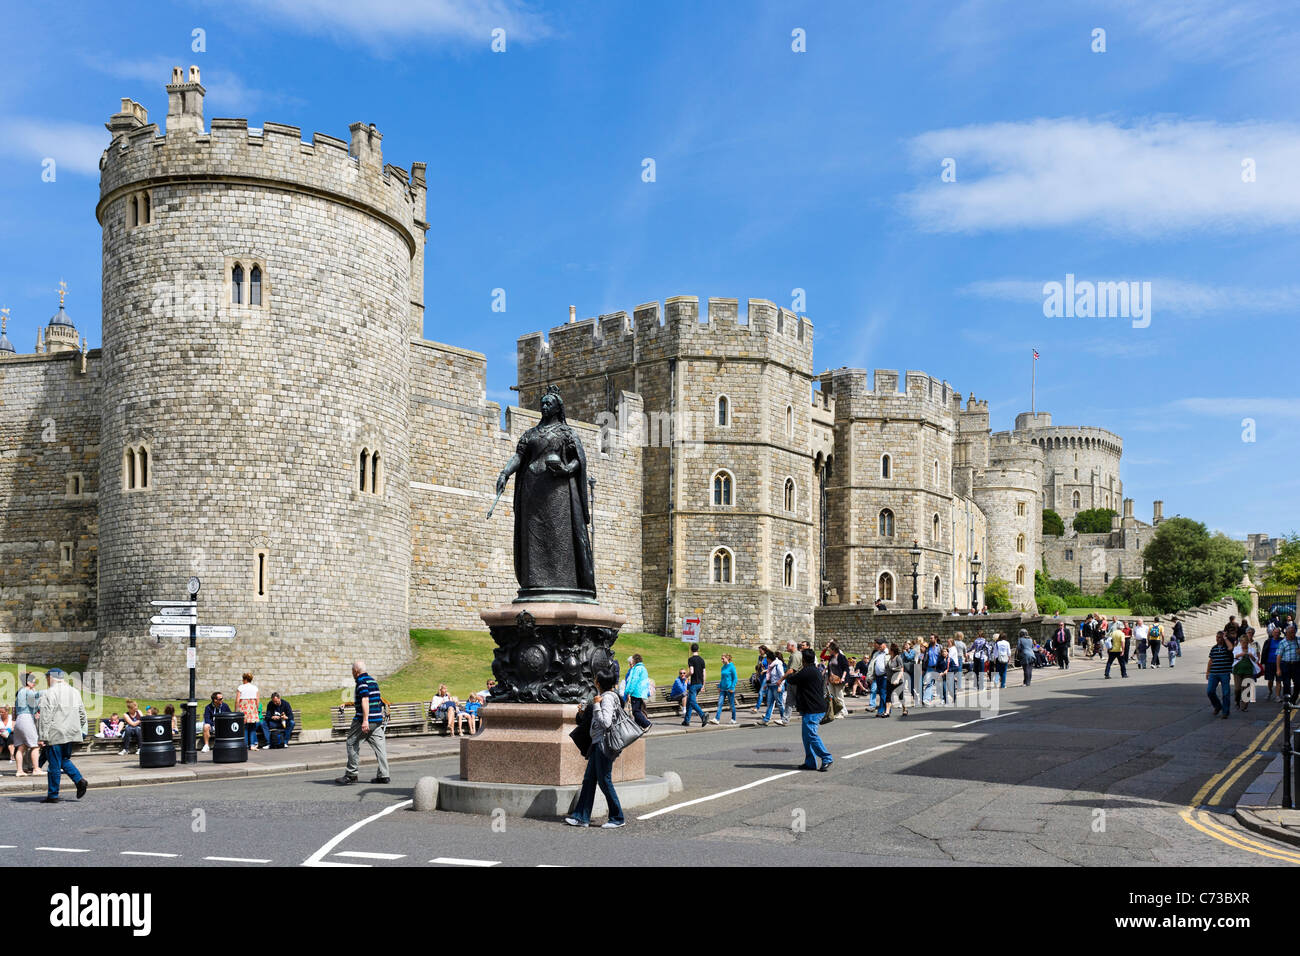 Windsor Castle from the High Street with statue of Queen Victoria in the foreground, Windsor, Berkshire, England, UK Stock Photo